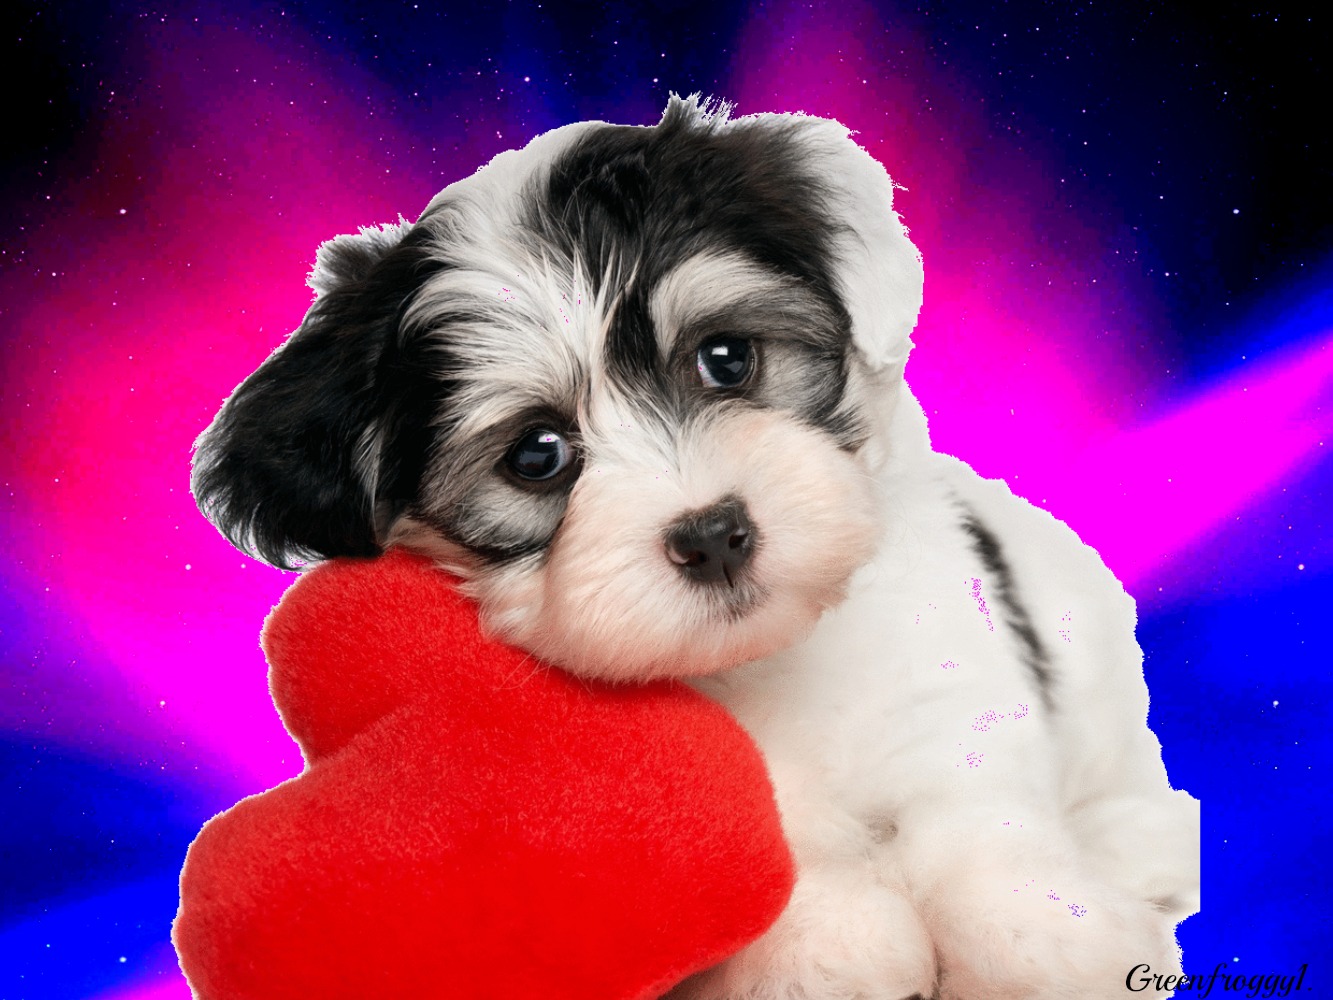 PUPPY LOVE Image - ID: 1031 - Image Abyss